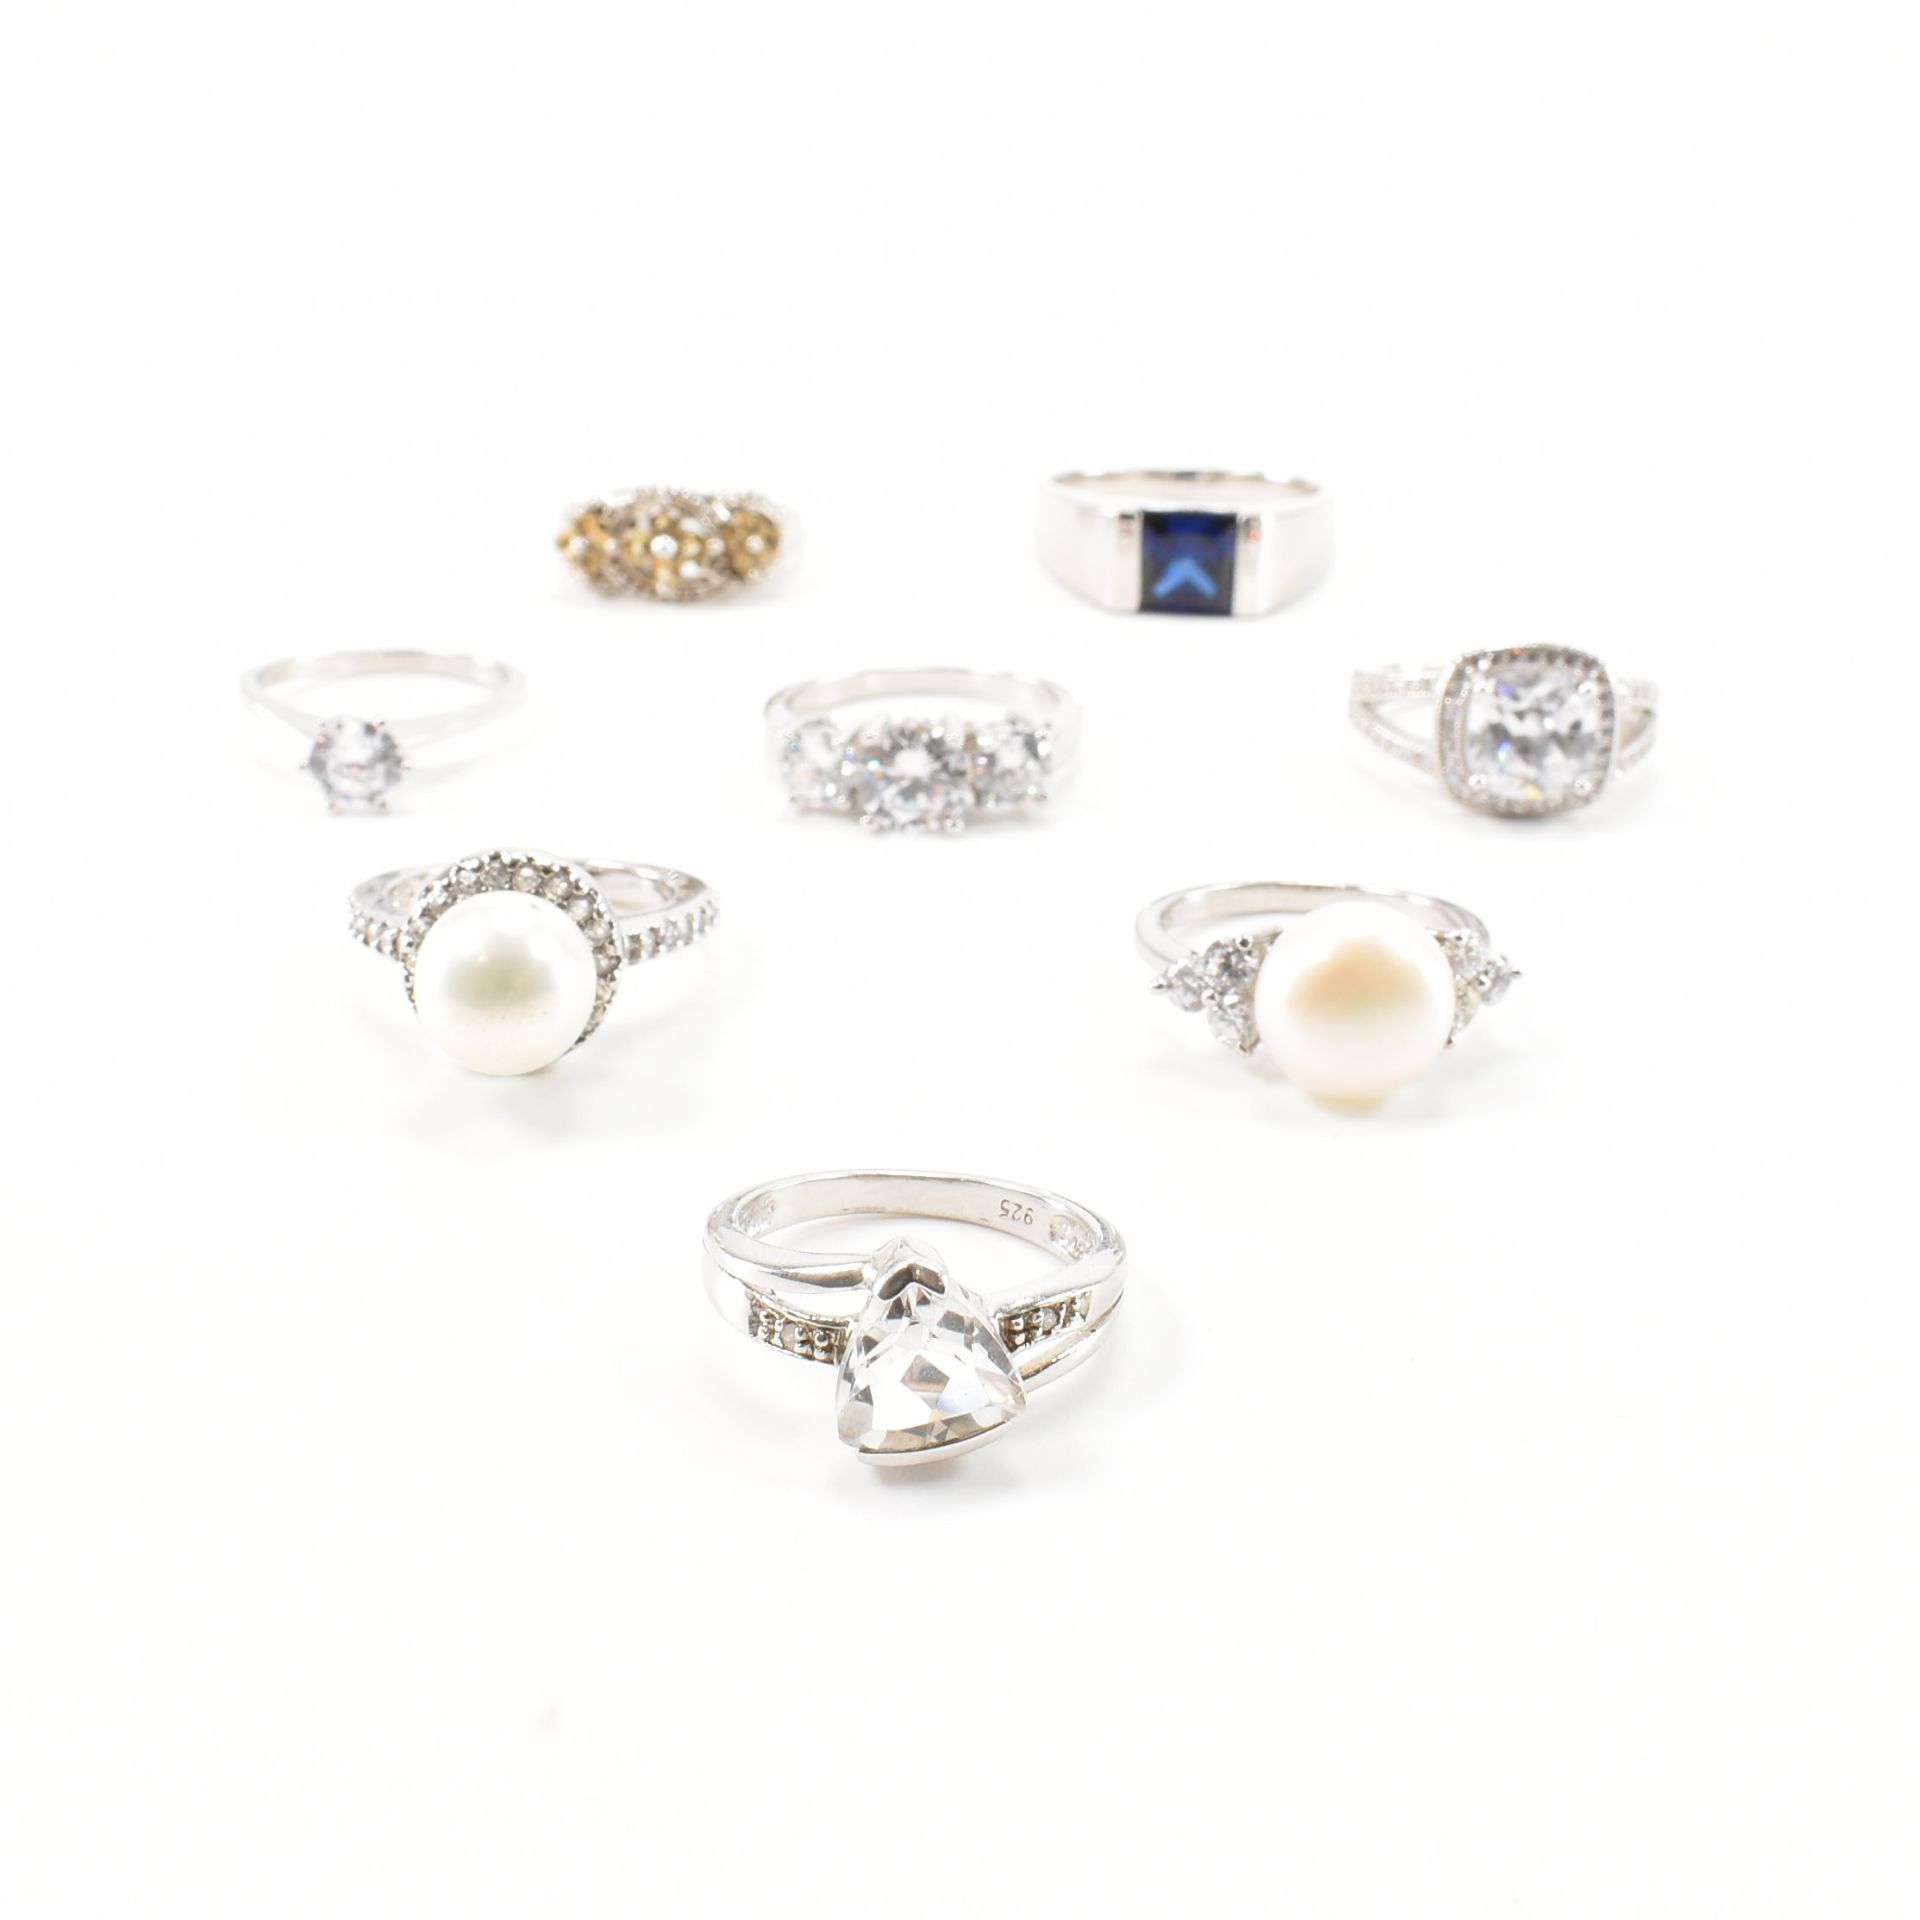 COLLECTION OF EIGHT 925 SILVER GEMSTONE SET RINGS